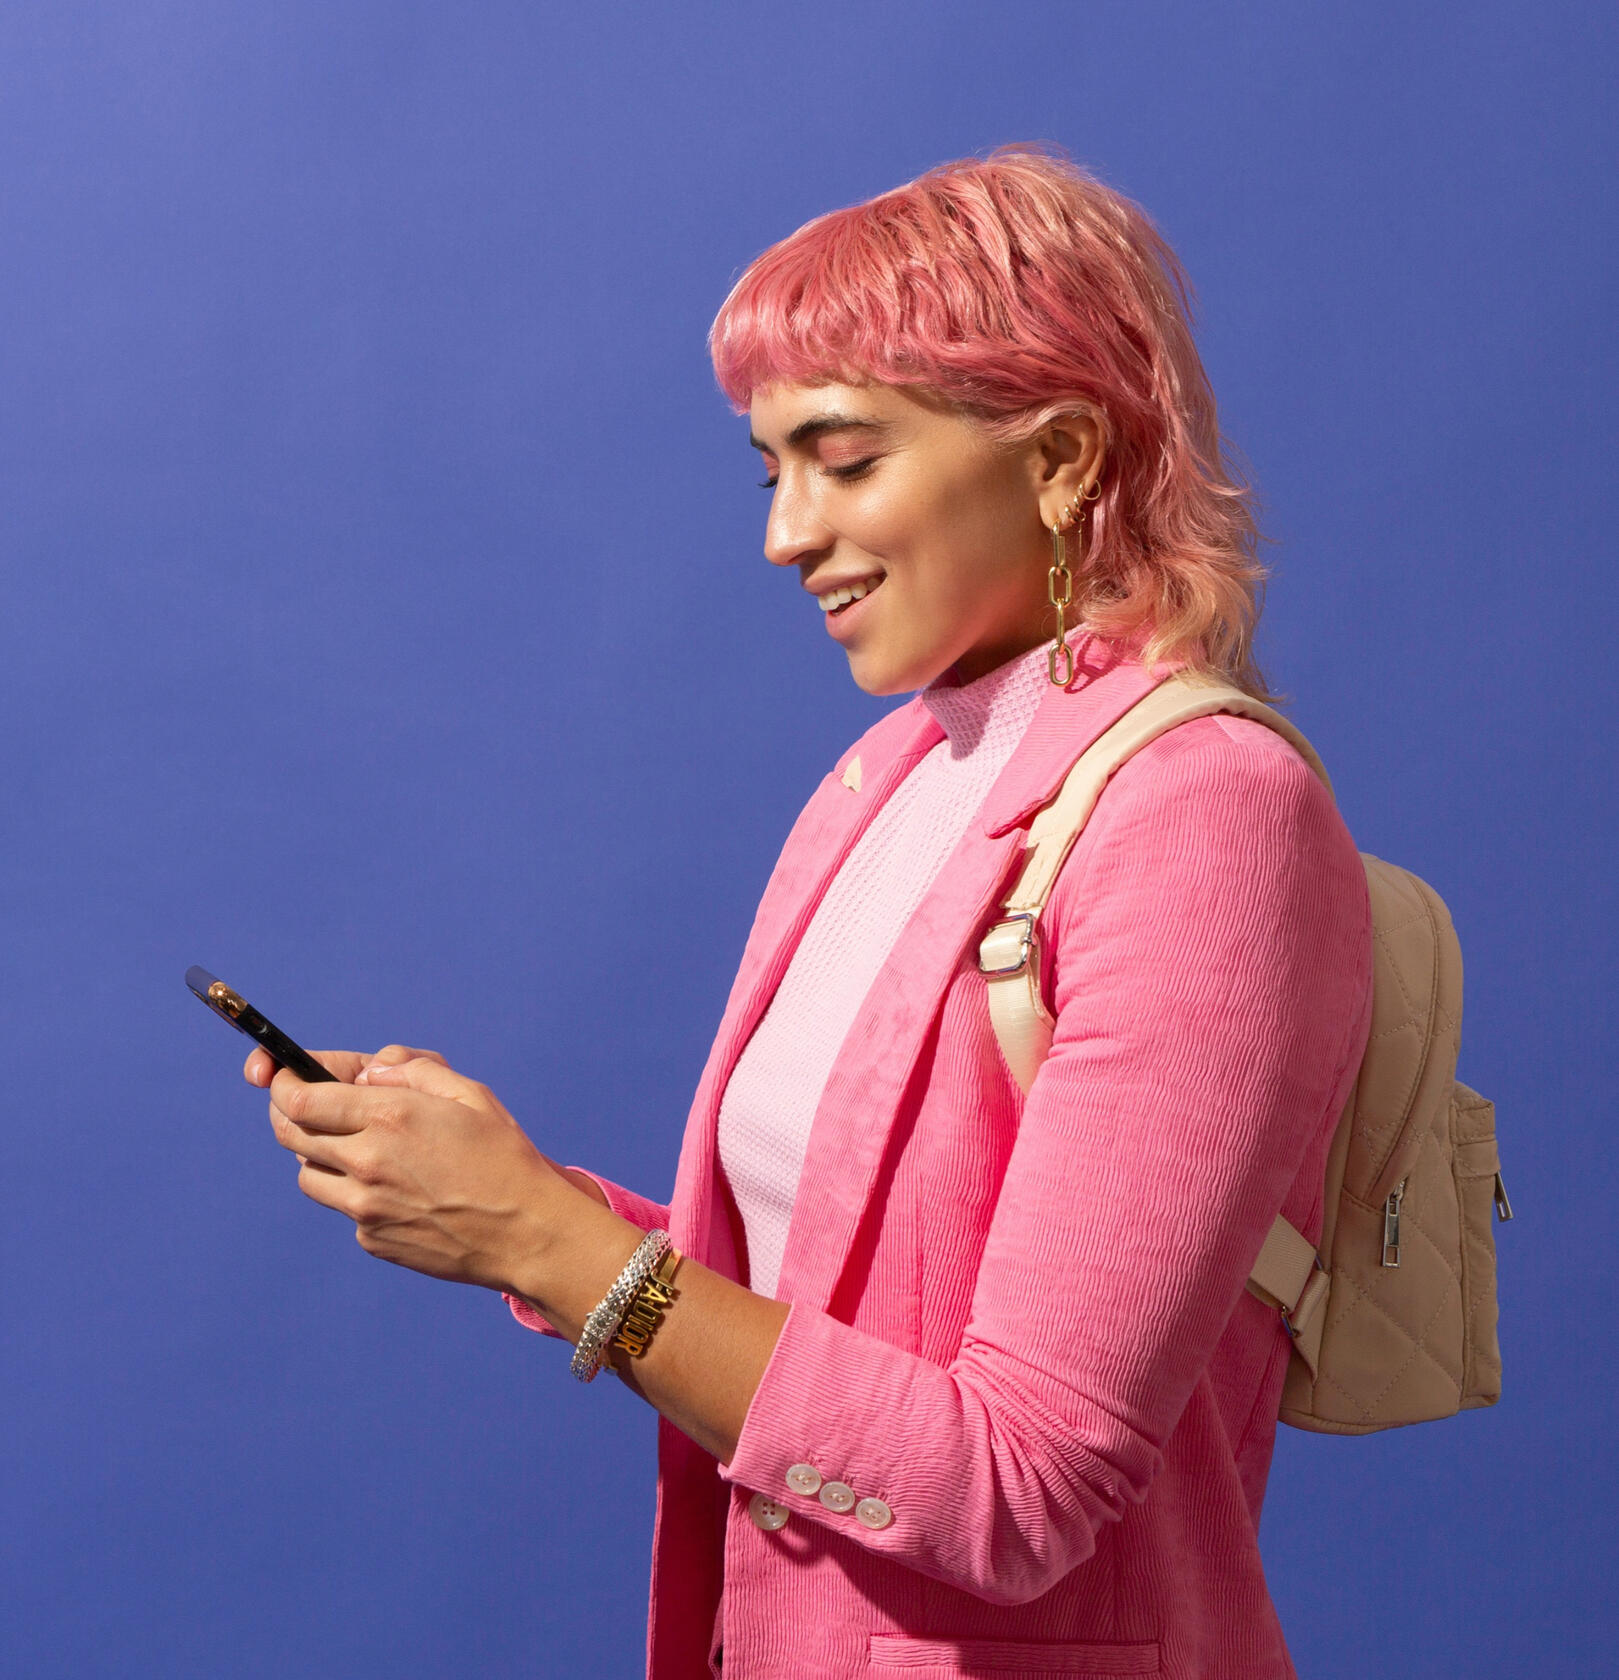 Photo woman with pink hair looking at her cell phone by No Revisions on Unsplash